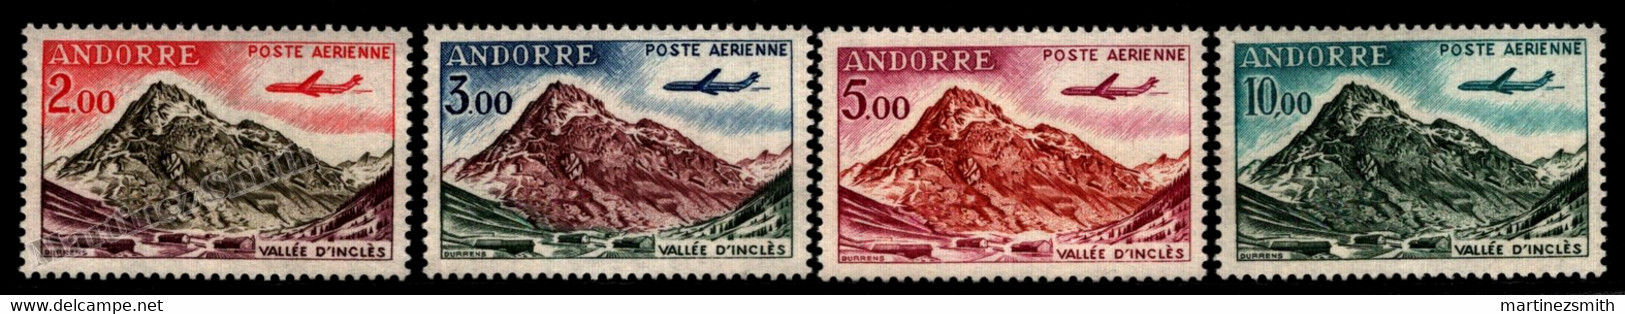 Andorre Français / French Andorra 1961 Airmail Yv. Inclès Valley, Soldeu, - MNH - Luftpost